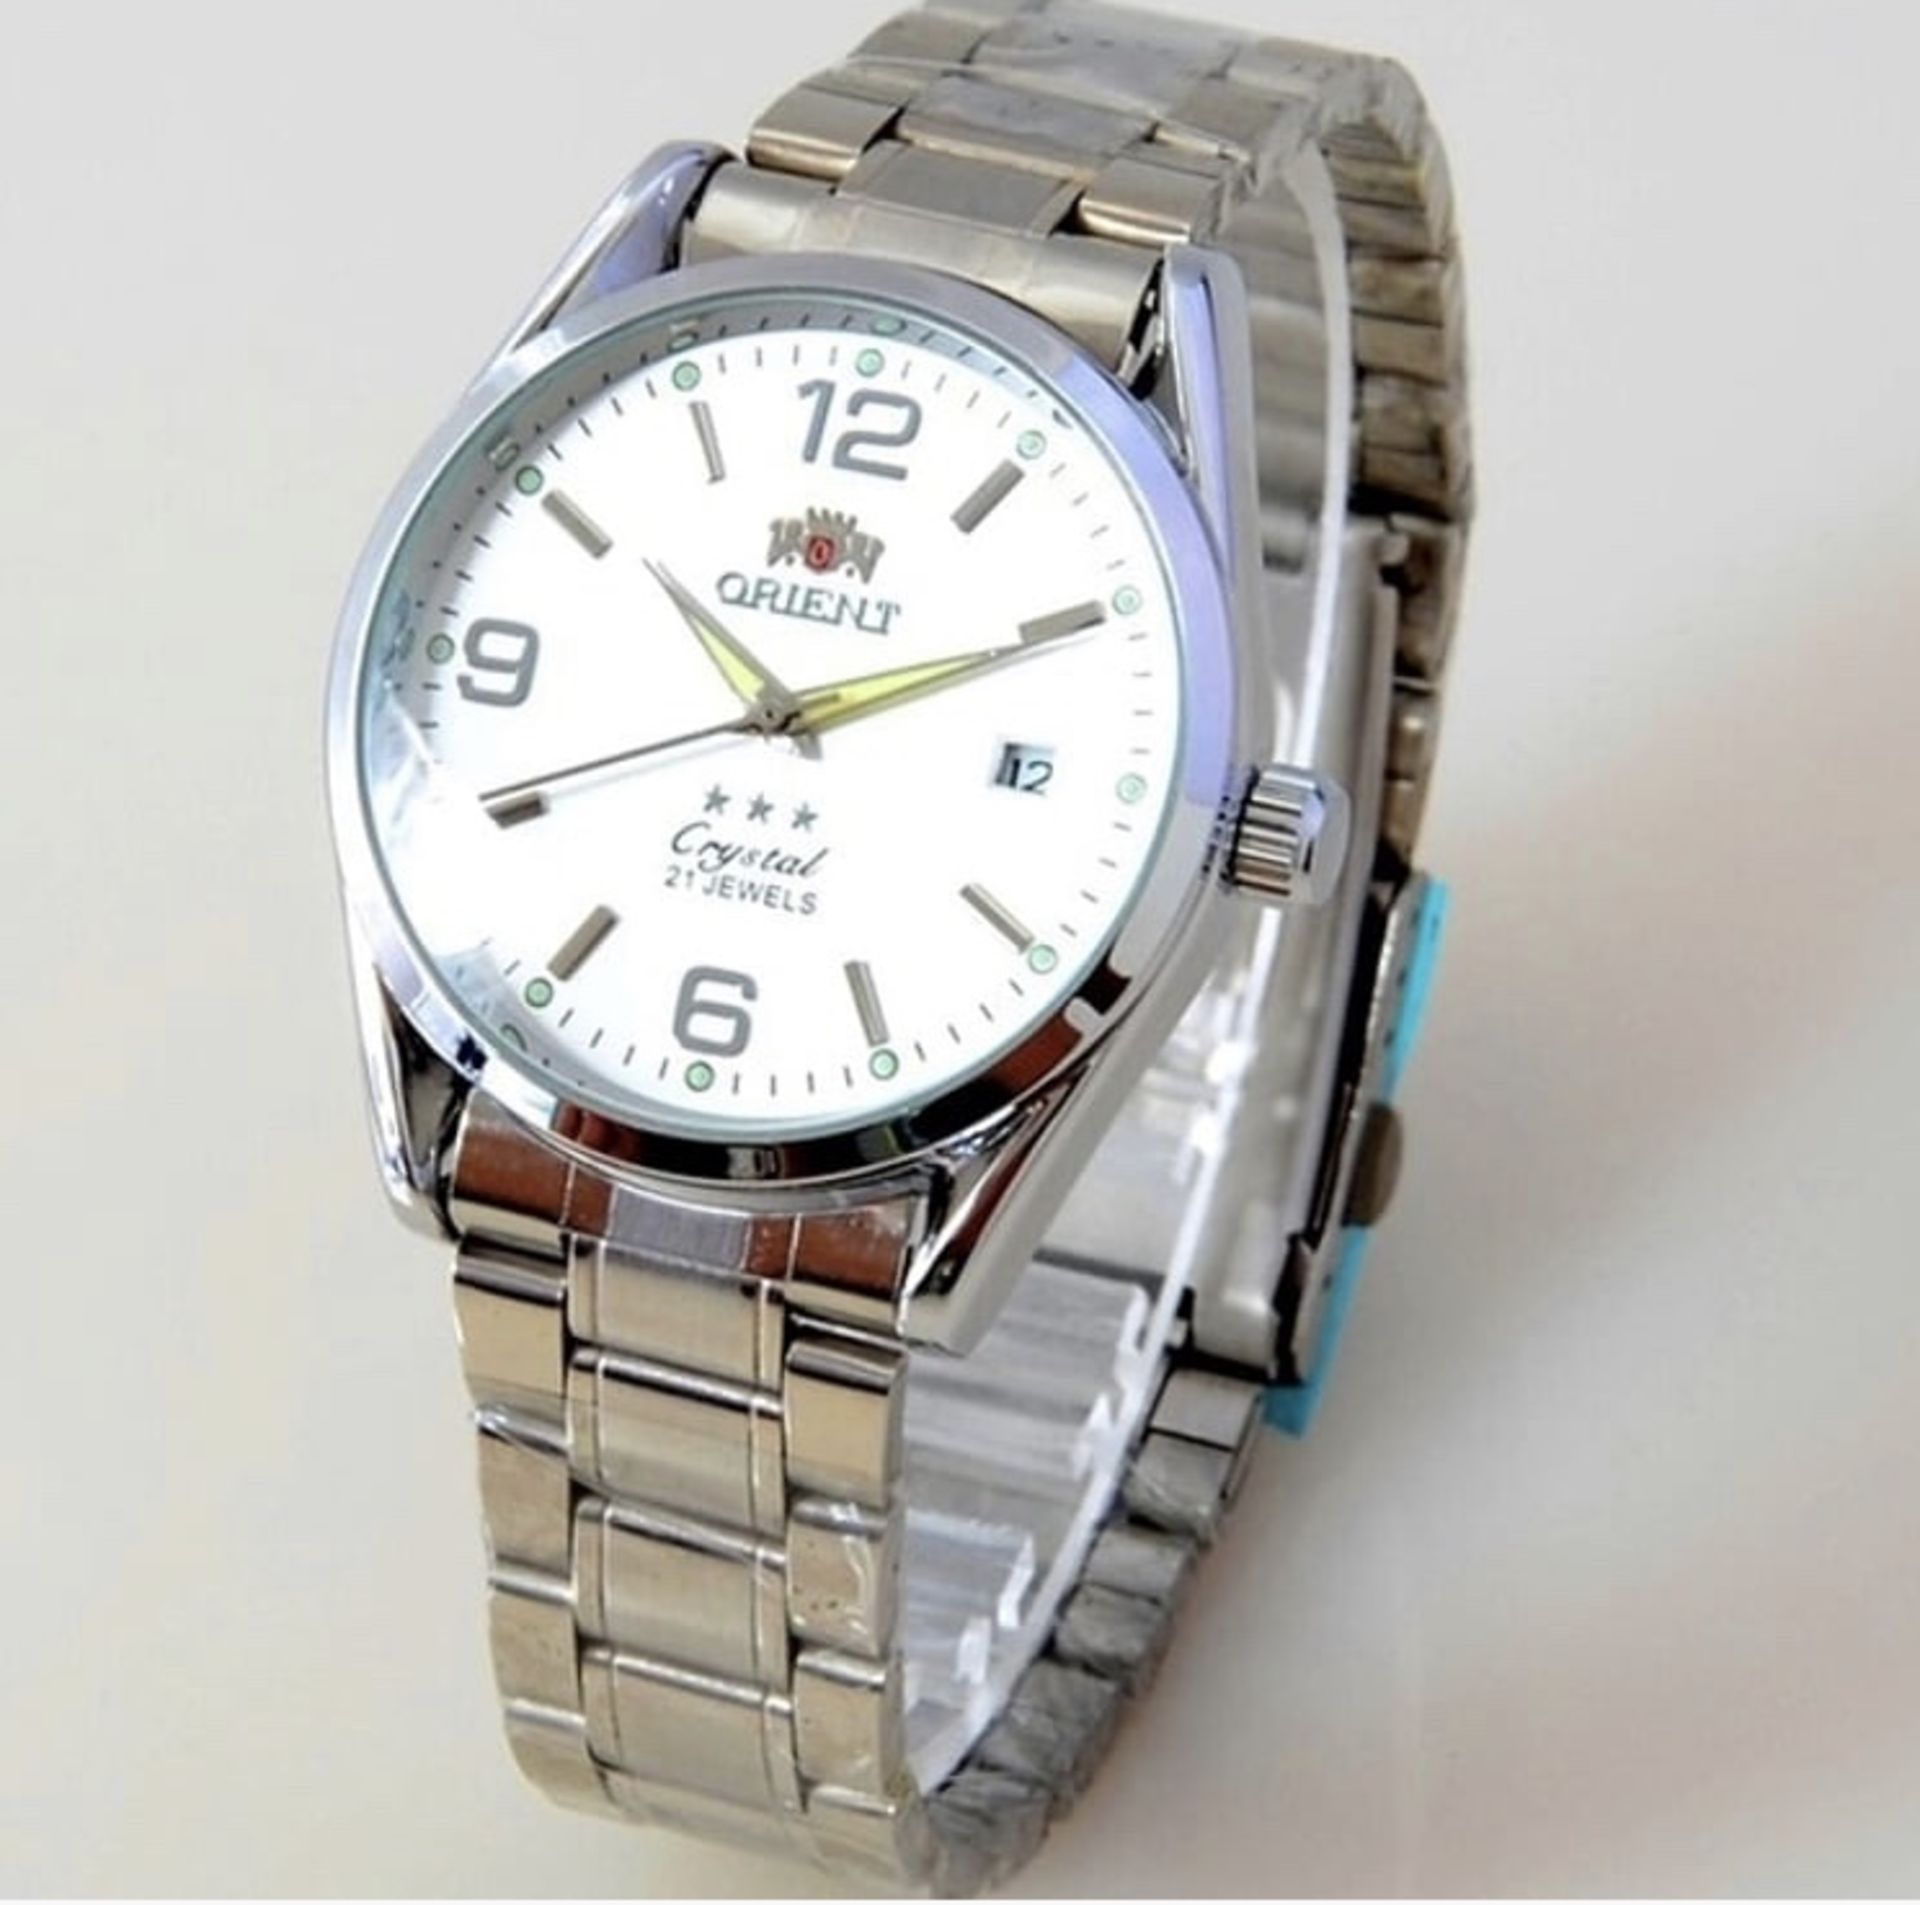 Classic Stainless Steel Mechanical Watch - Image 2 of 2